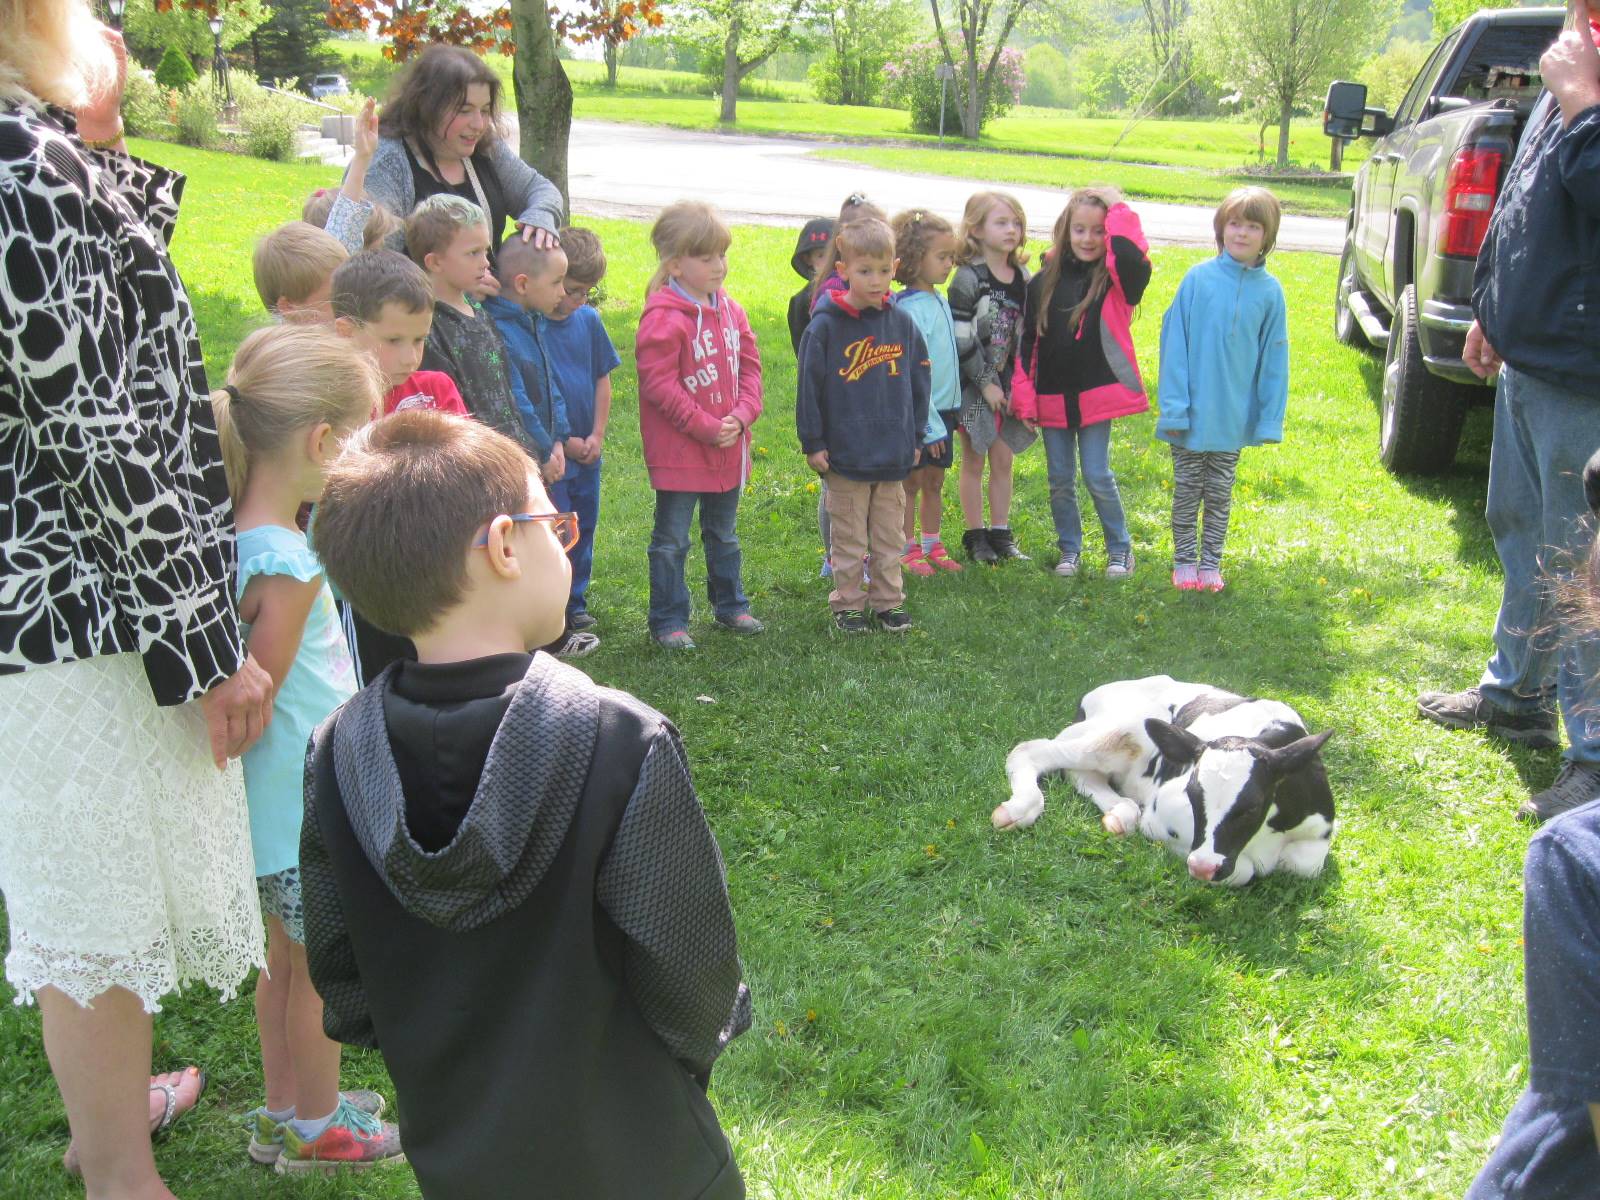 A group of students observe a 2 day old calf